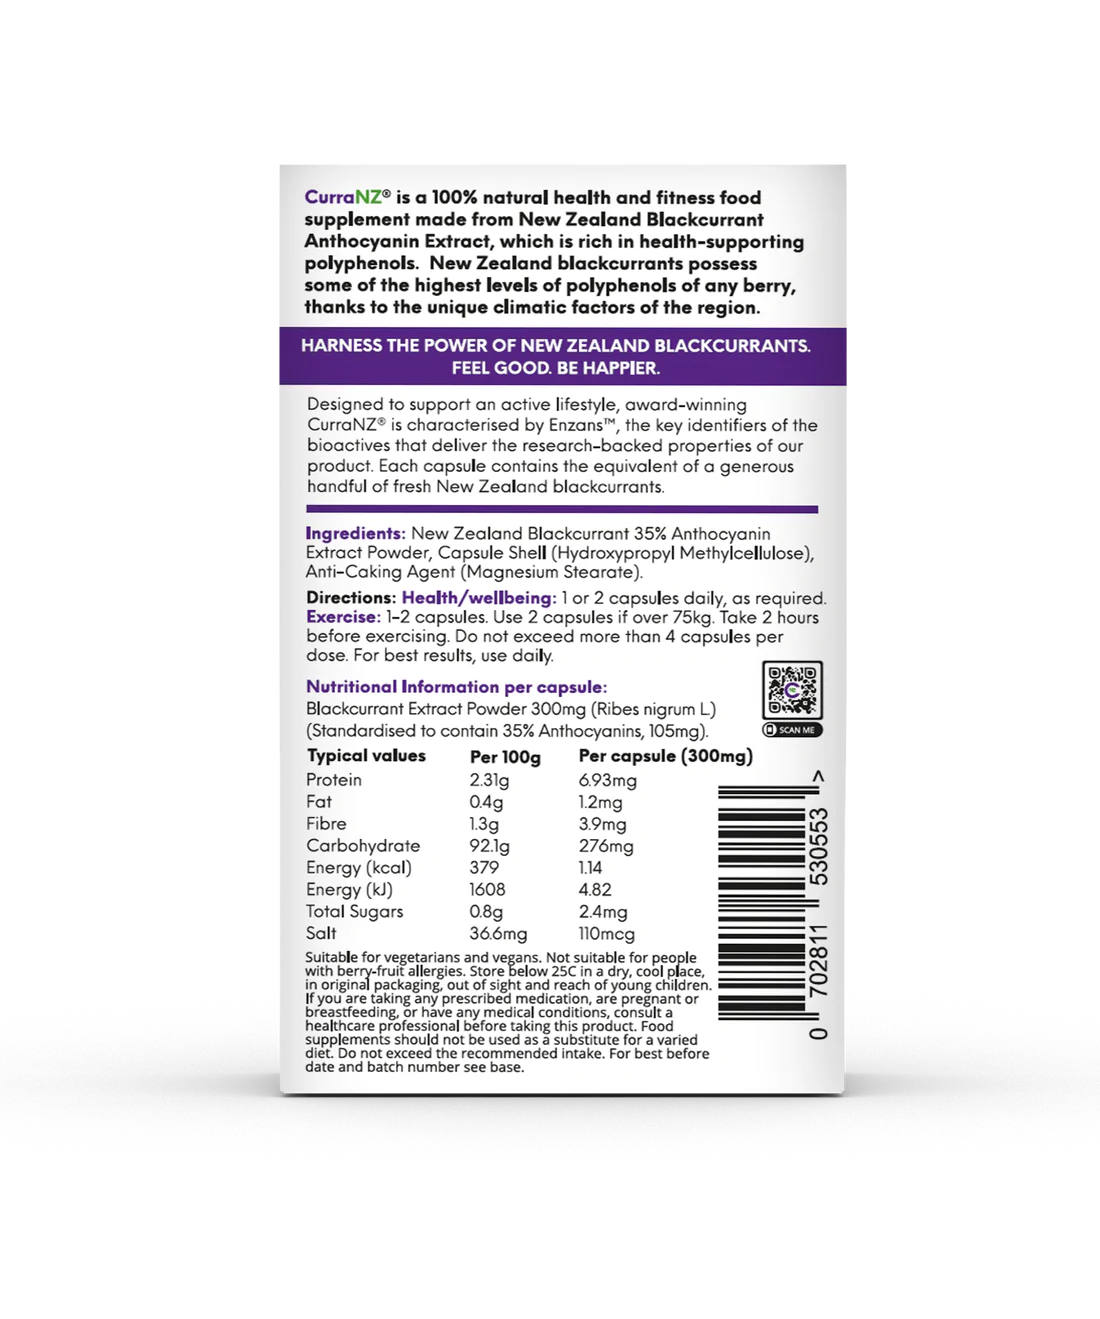 CurraNZ New Zealand Blackcurrant Supplement | 30 Capsule Pack